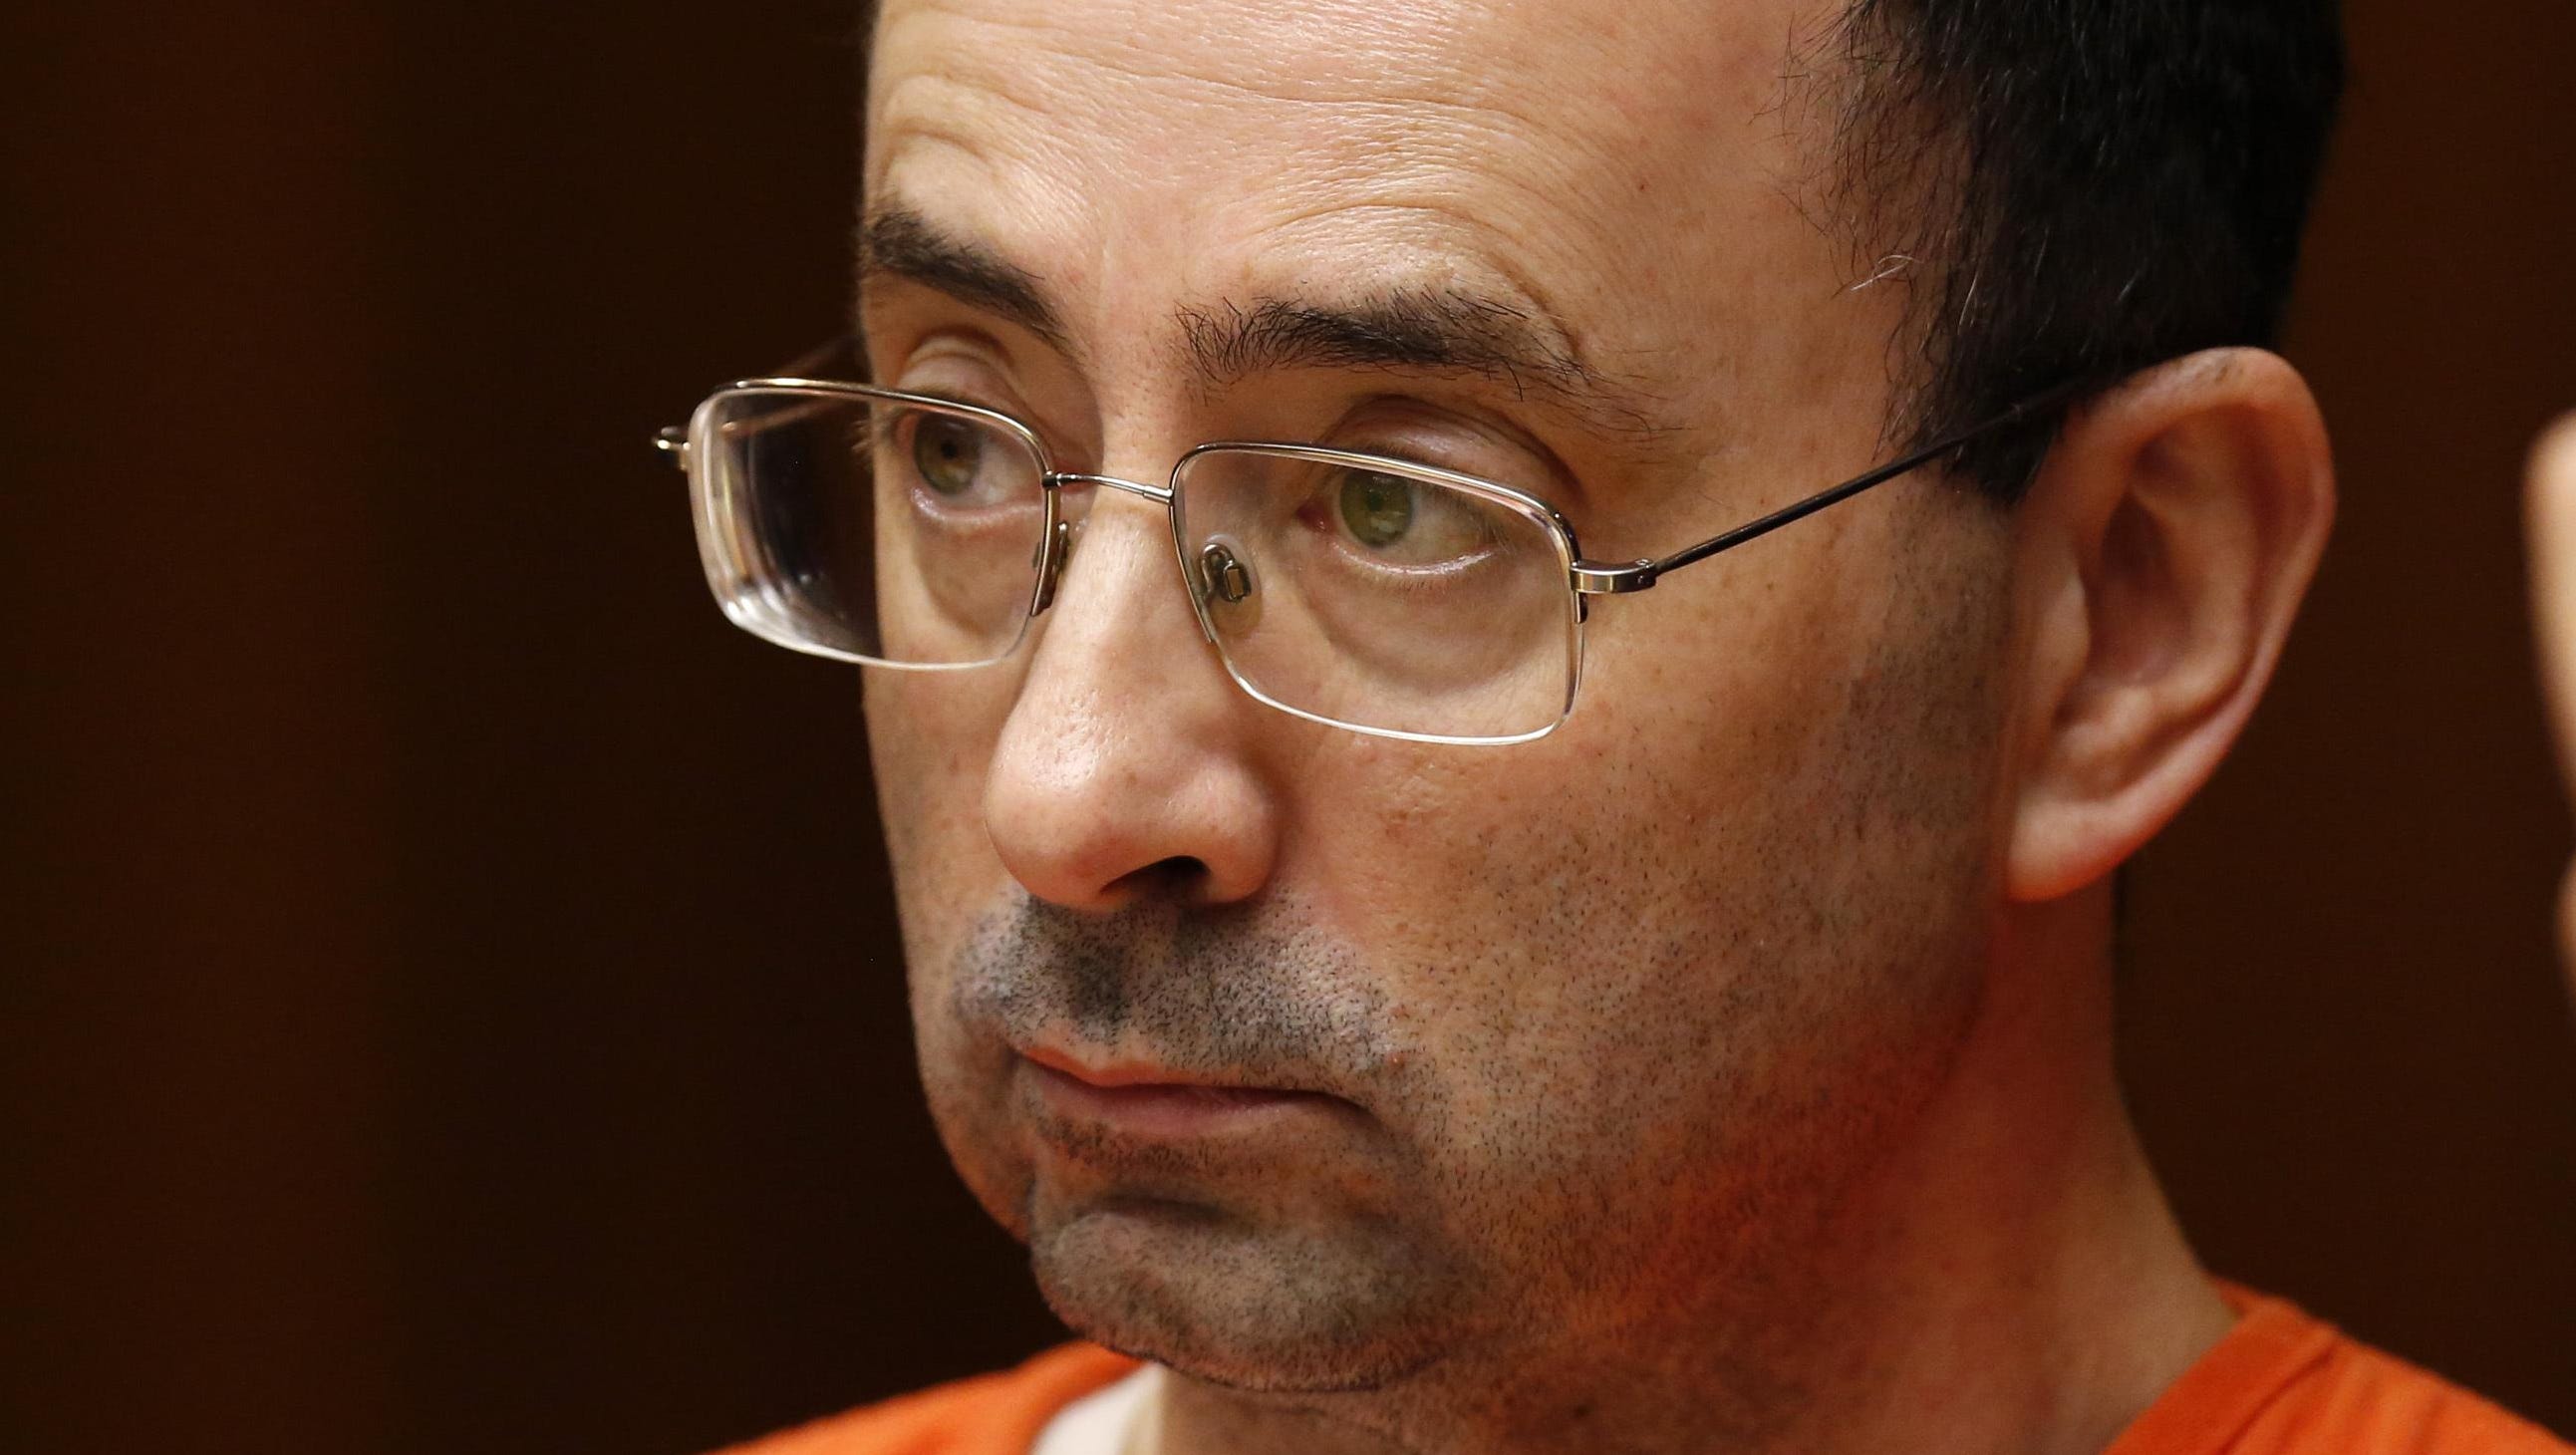 Larry Nassar was known for his ability to heal athletes. But that sterling image stands in stark contrast with the sex allegations he faces.